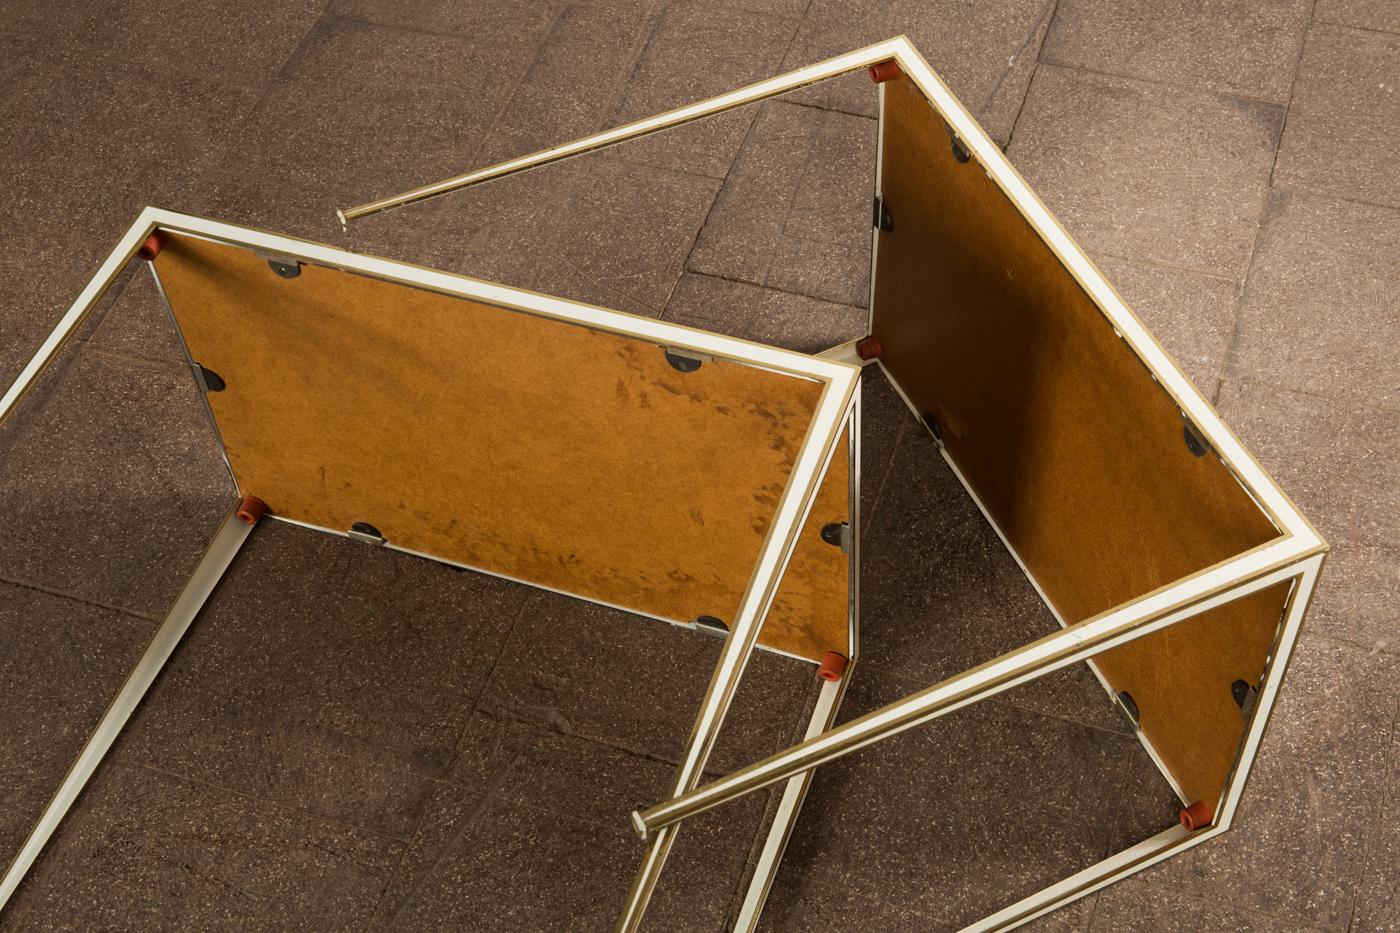 Pair of Mid-Century side tables with Mirror Glass tops by Vereinigte Werkstätten

This pair of side tables was produced by Vereinigte Werkstätten München in the 1960s.
The tables are made of brass structures, the tops are made of mirrored glass. One